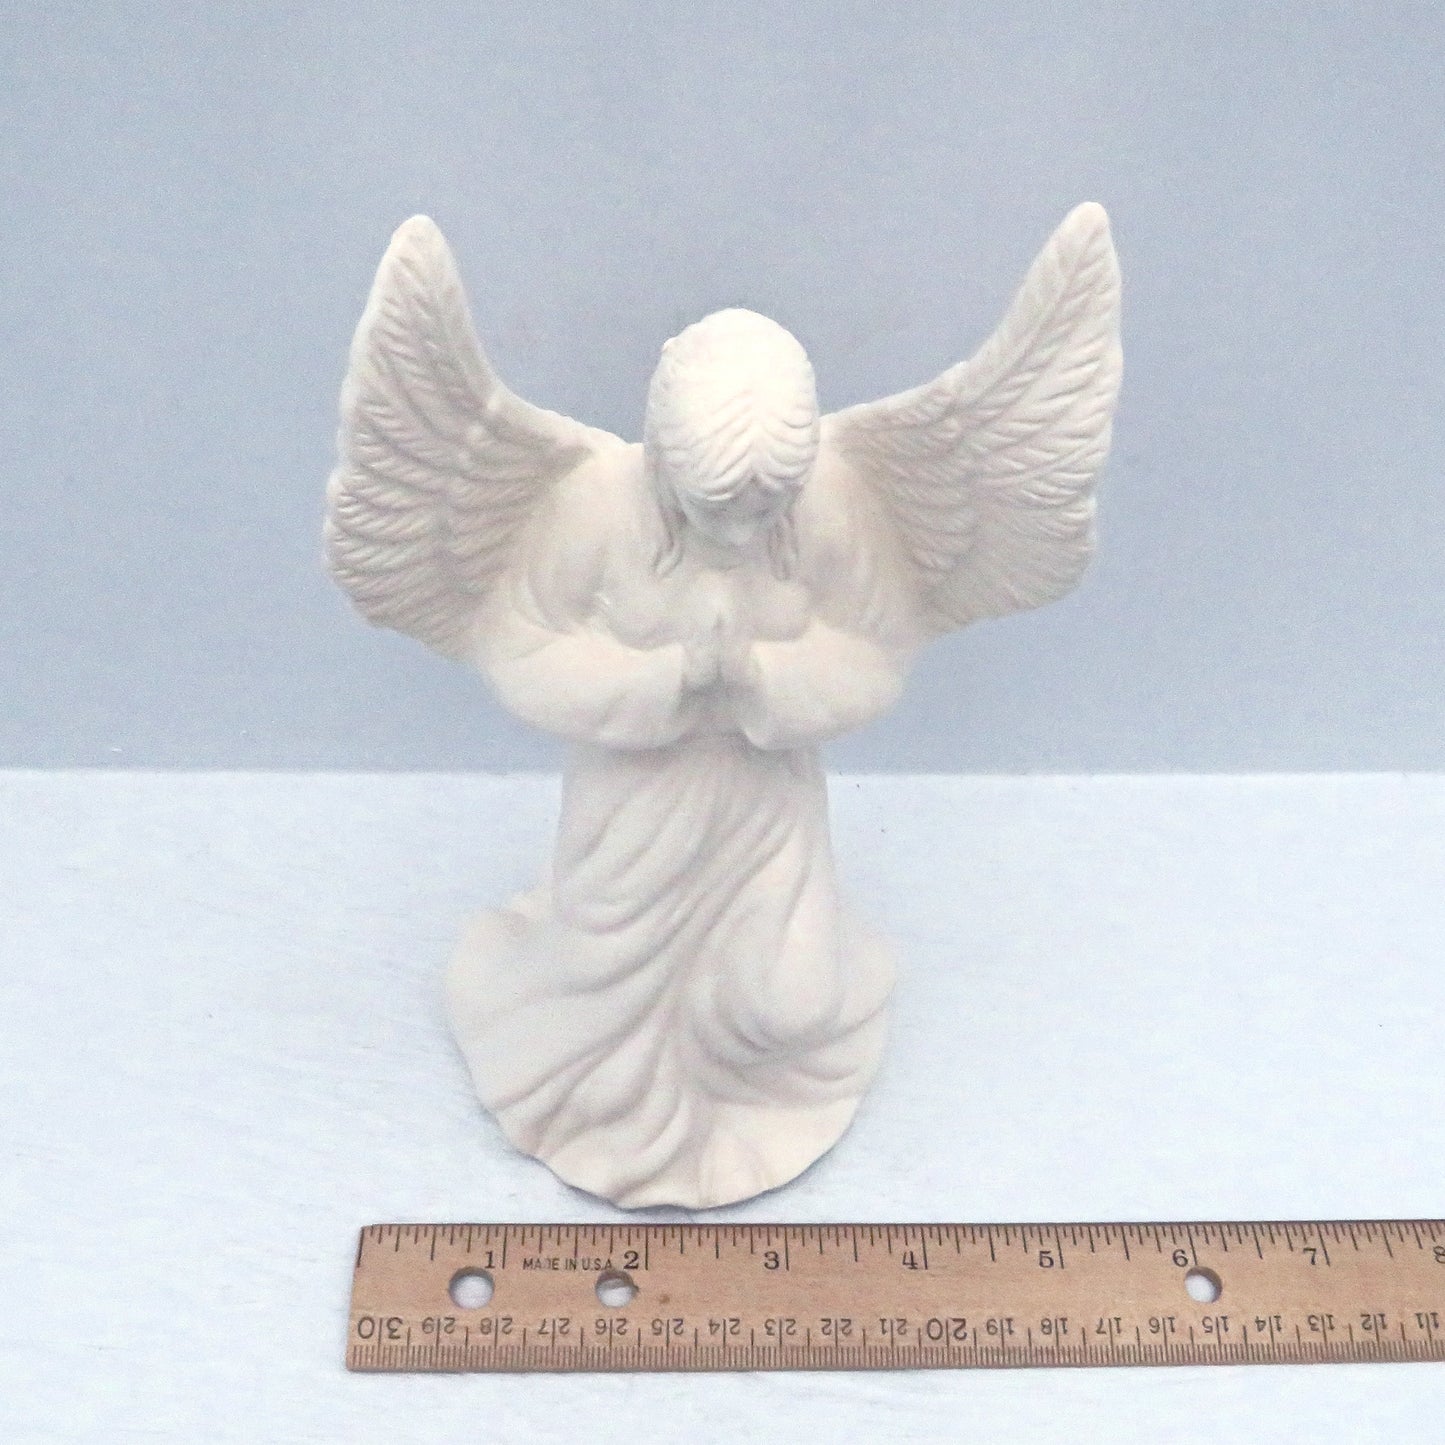 Top view of handmade ceramic praying angel figure near a ruler showing that she is approximately 3 3/4 inches across the wing span.  She is standing on a light blue background